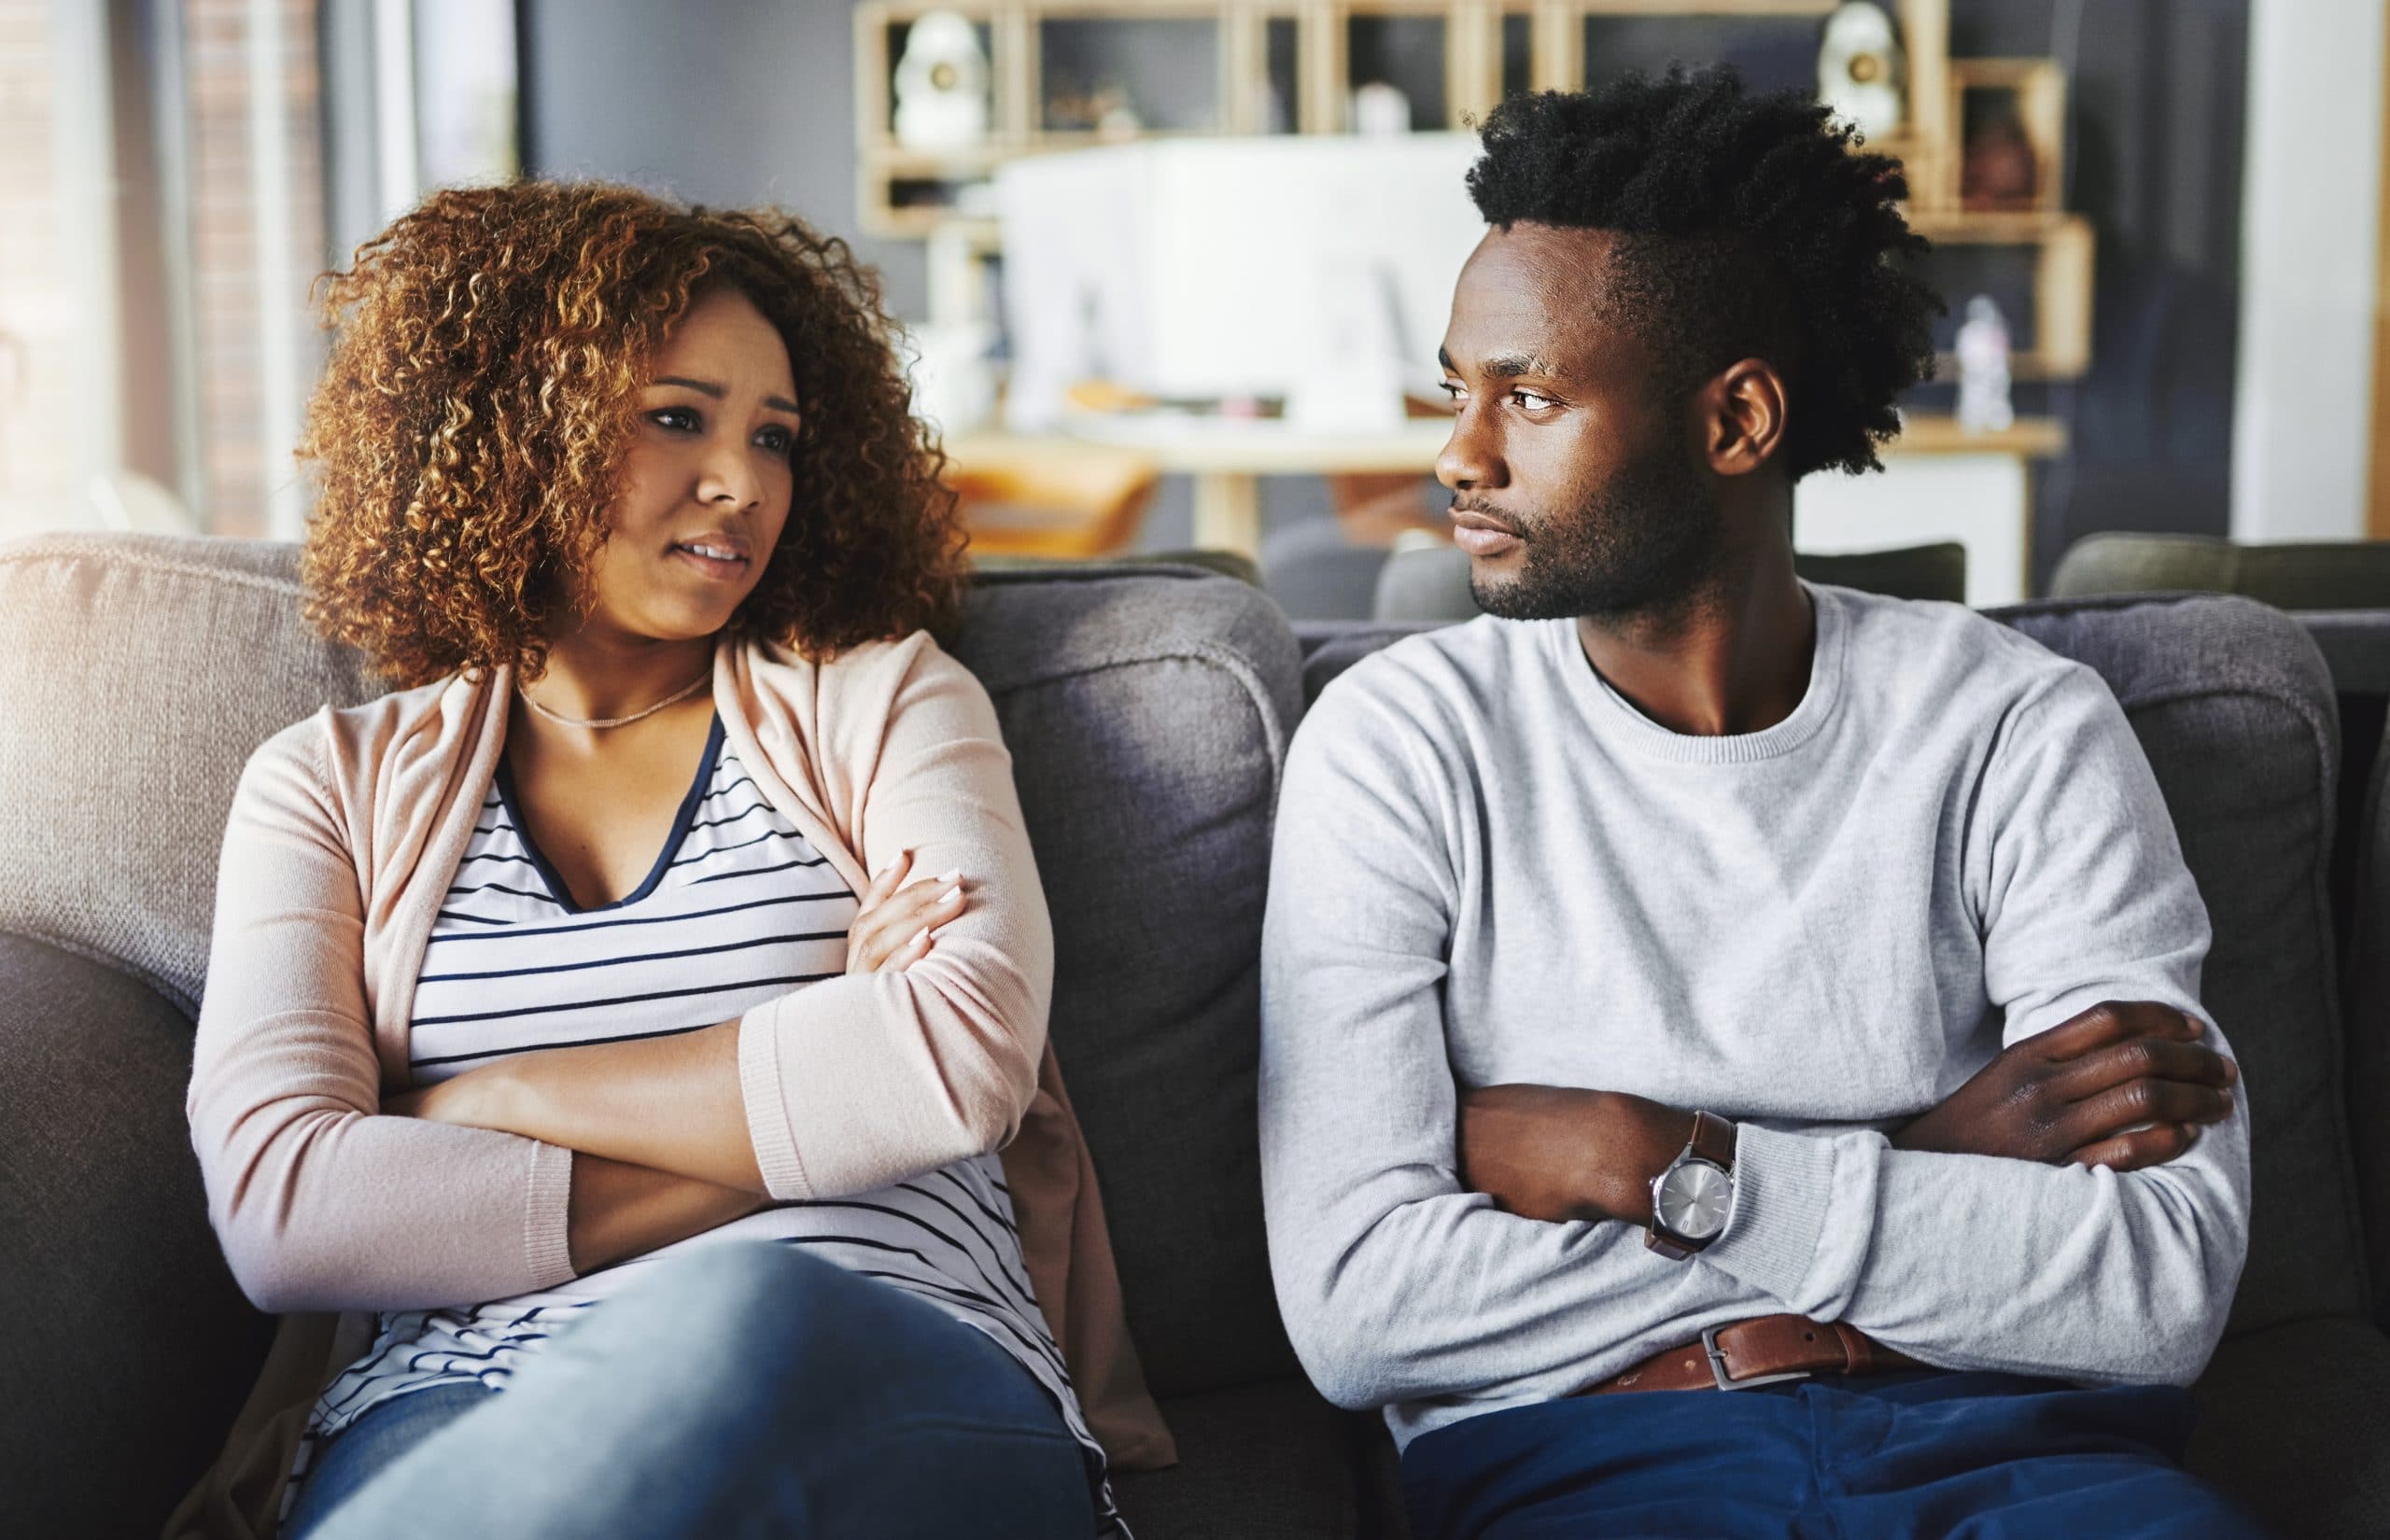 Relationship Help – 7 Reasons Couples Disagree About Getting Help